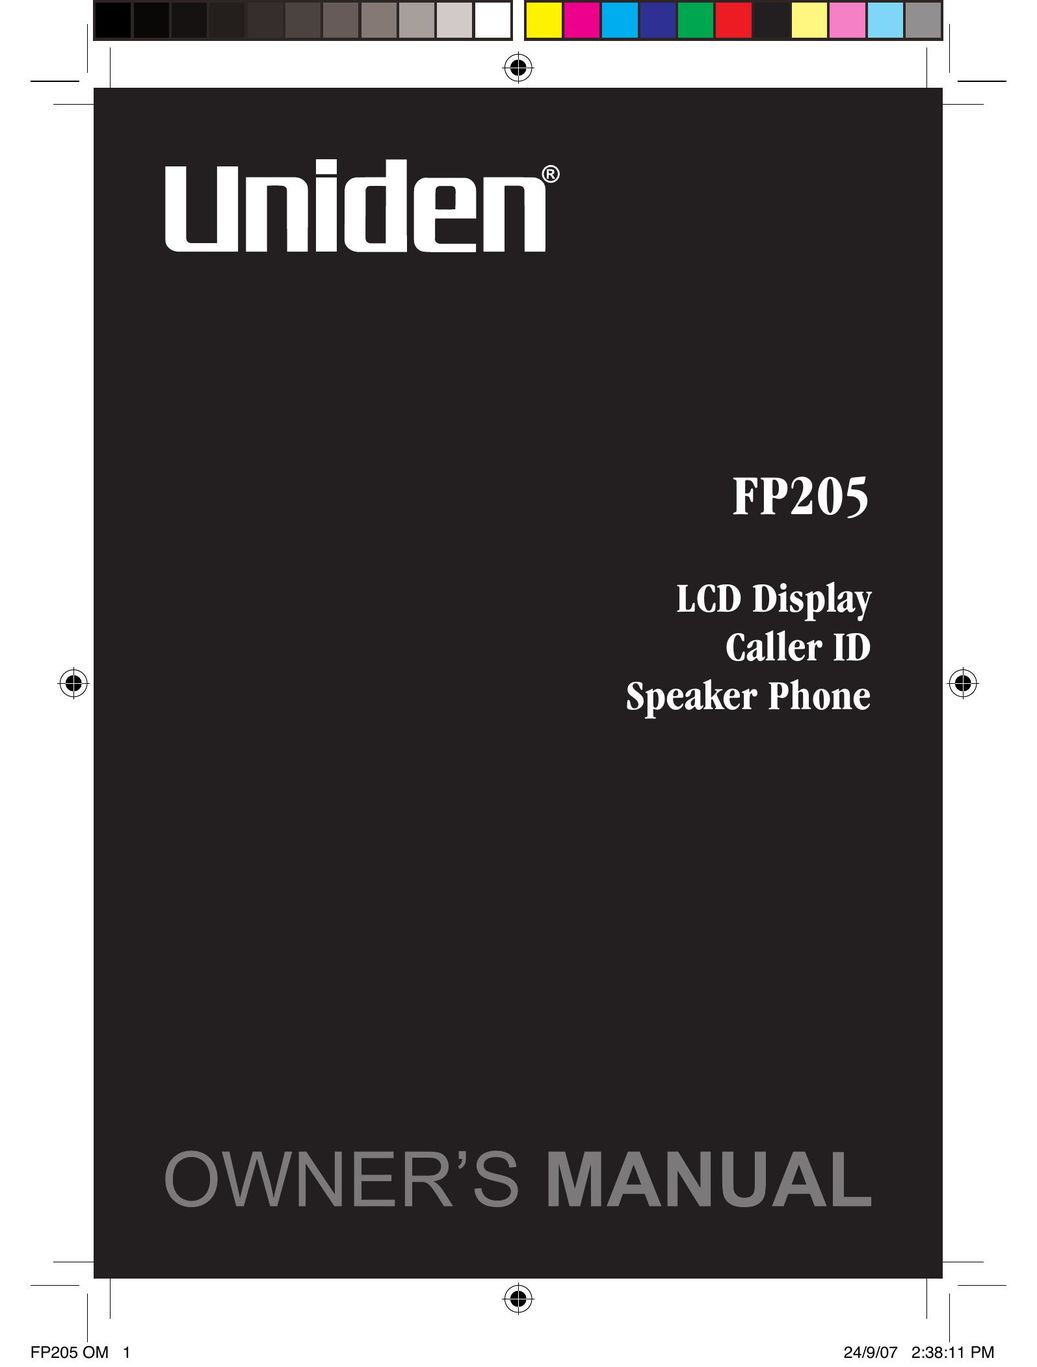 Uniden FP205 Conference Phone User Manual